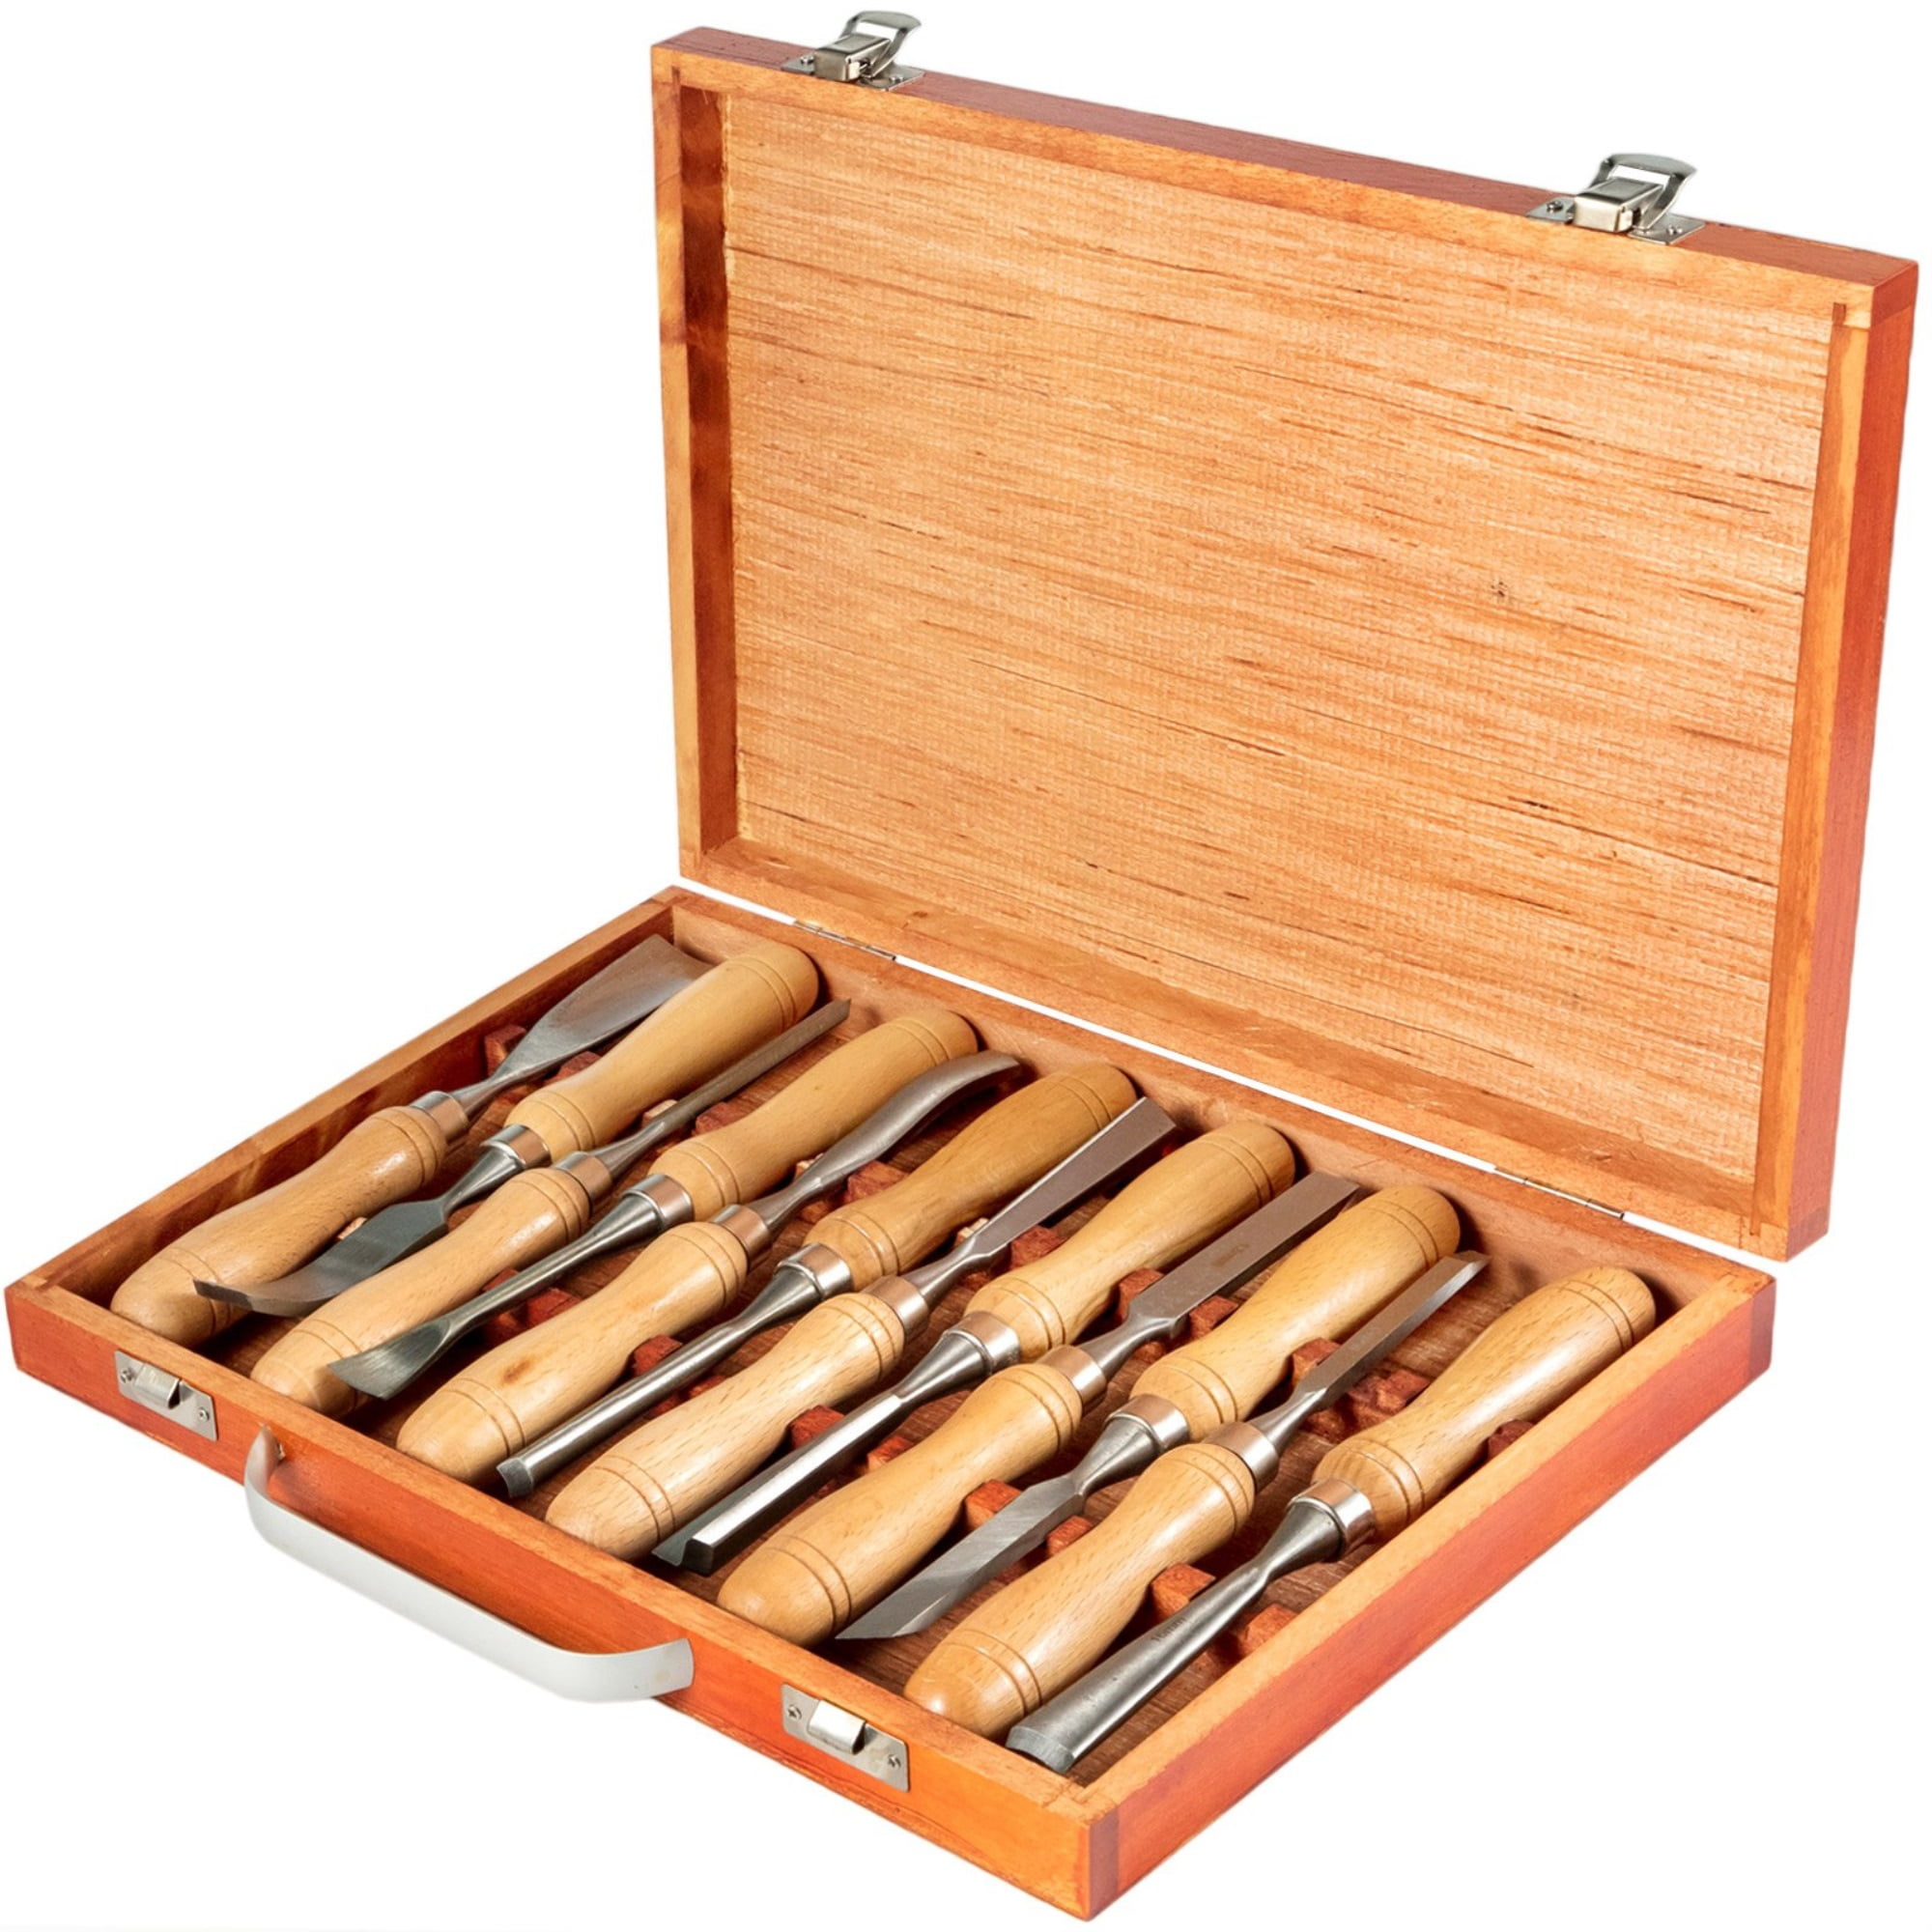 12PC/set Wood Lathe Chisel Set Woodworking Turning Tools Cutting Carving Blades 